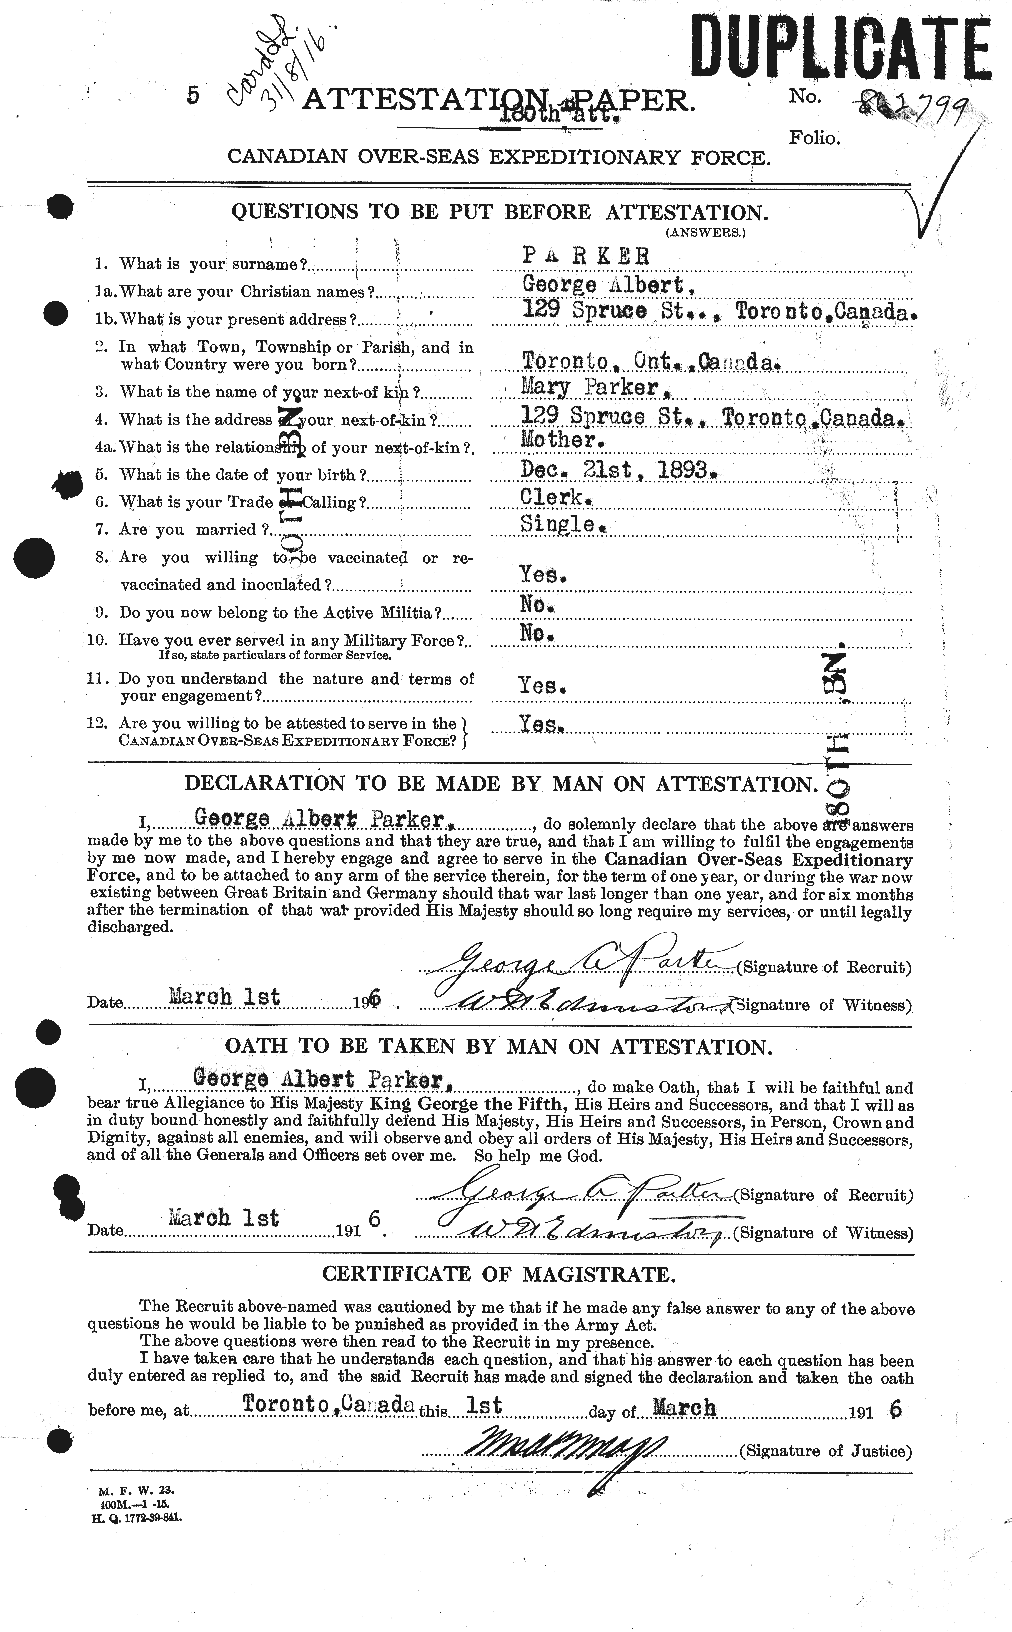 Personnel Records of the First World War - CEF 565251a